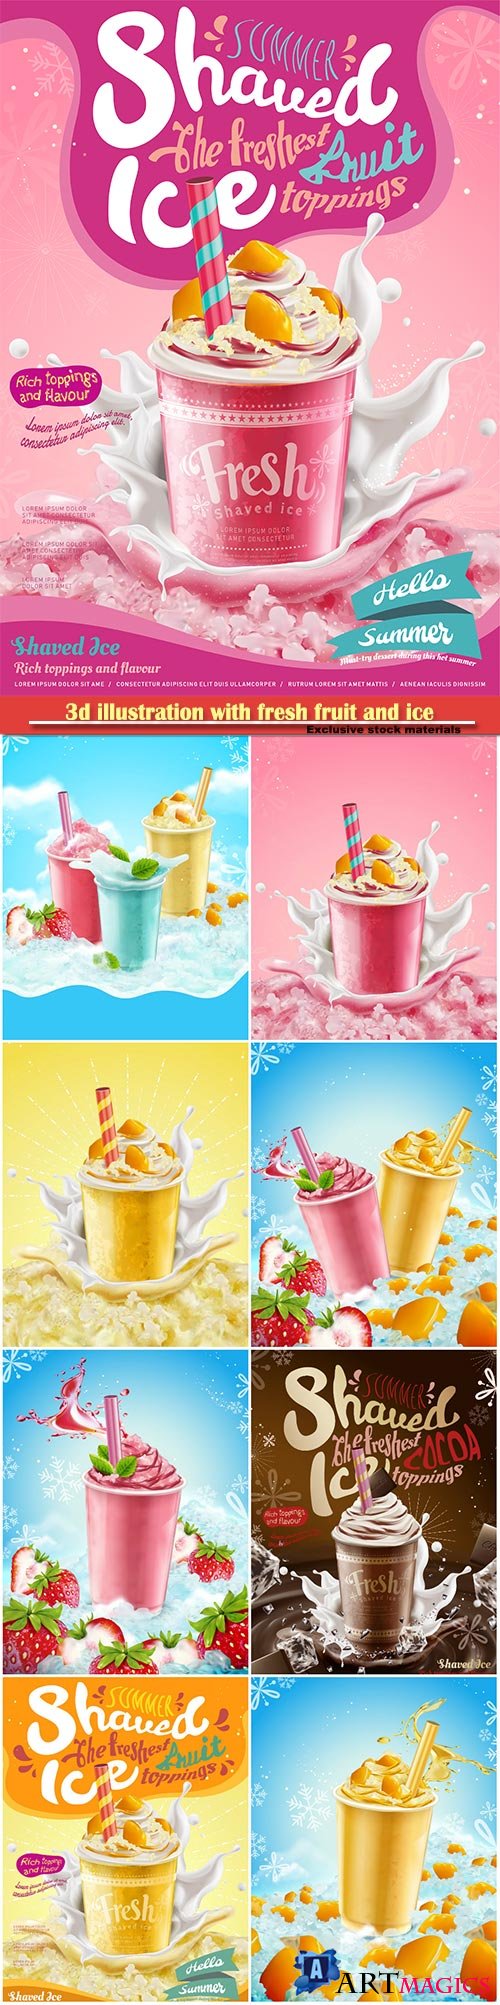 3d illustration with fresh fruit and ice elements, syrup ice shaved ads with creamy topping and splashing